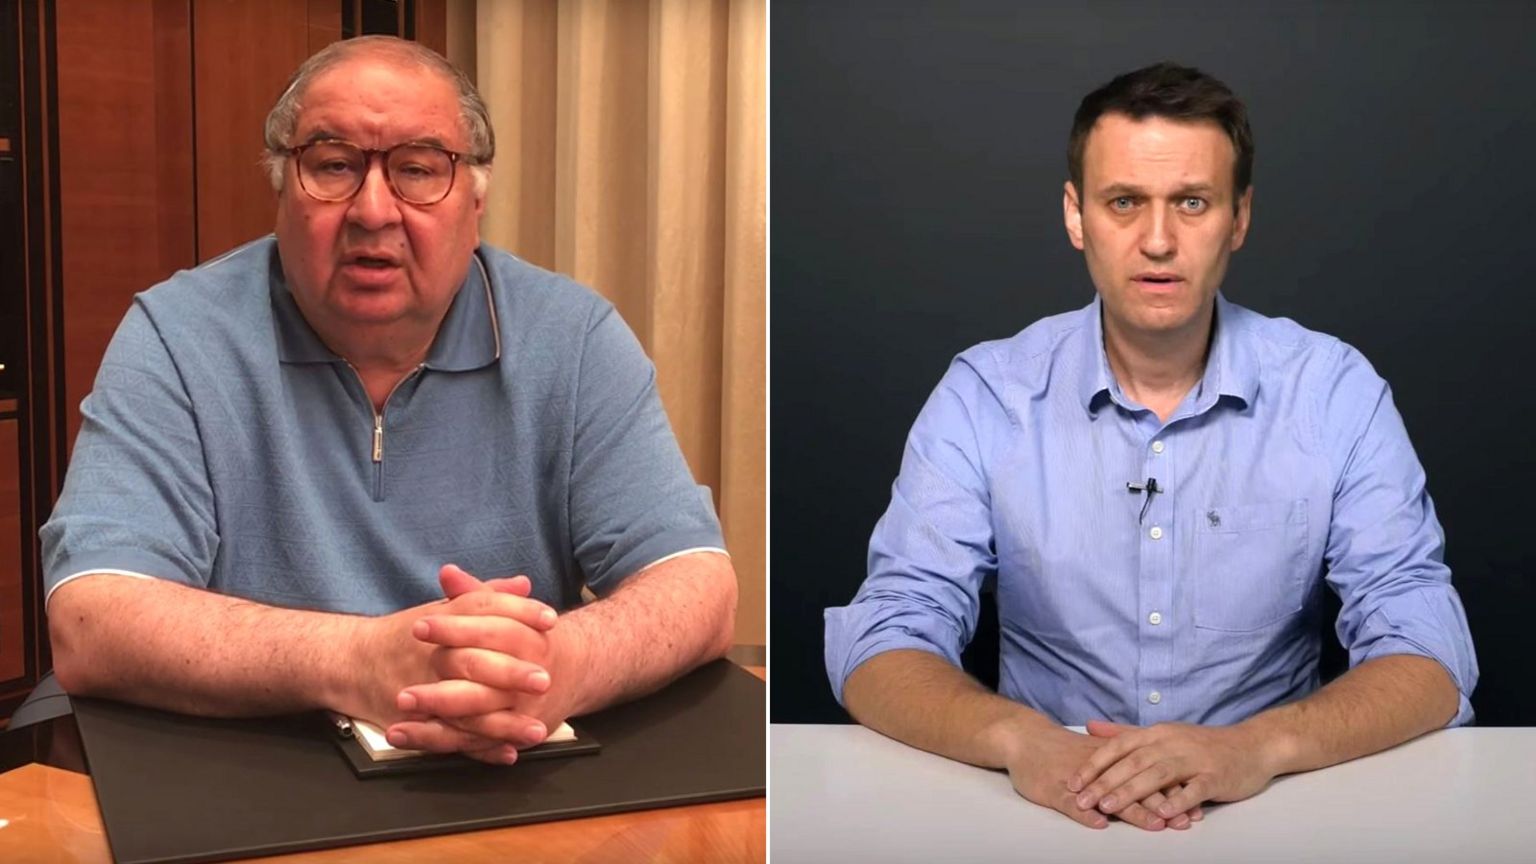 Russian tycoon Alisher Usmanov (l) and anti-corruption campaigner Alexei Navalny (r) appear in videos attacking each other.